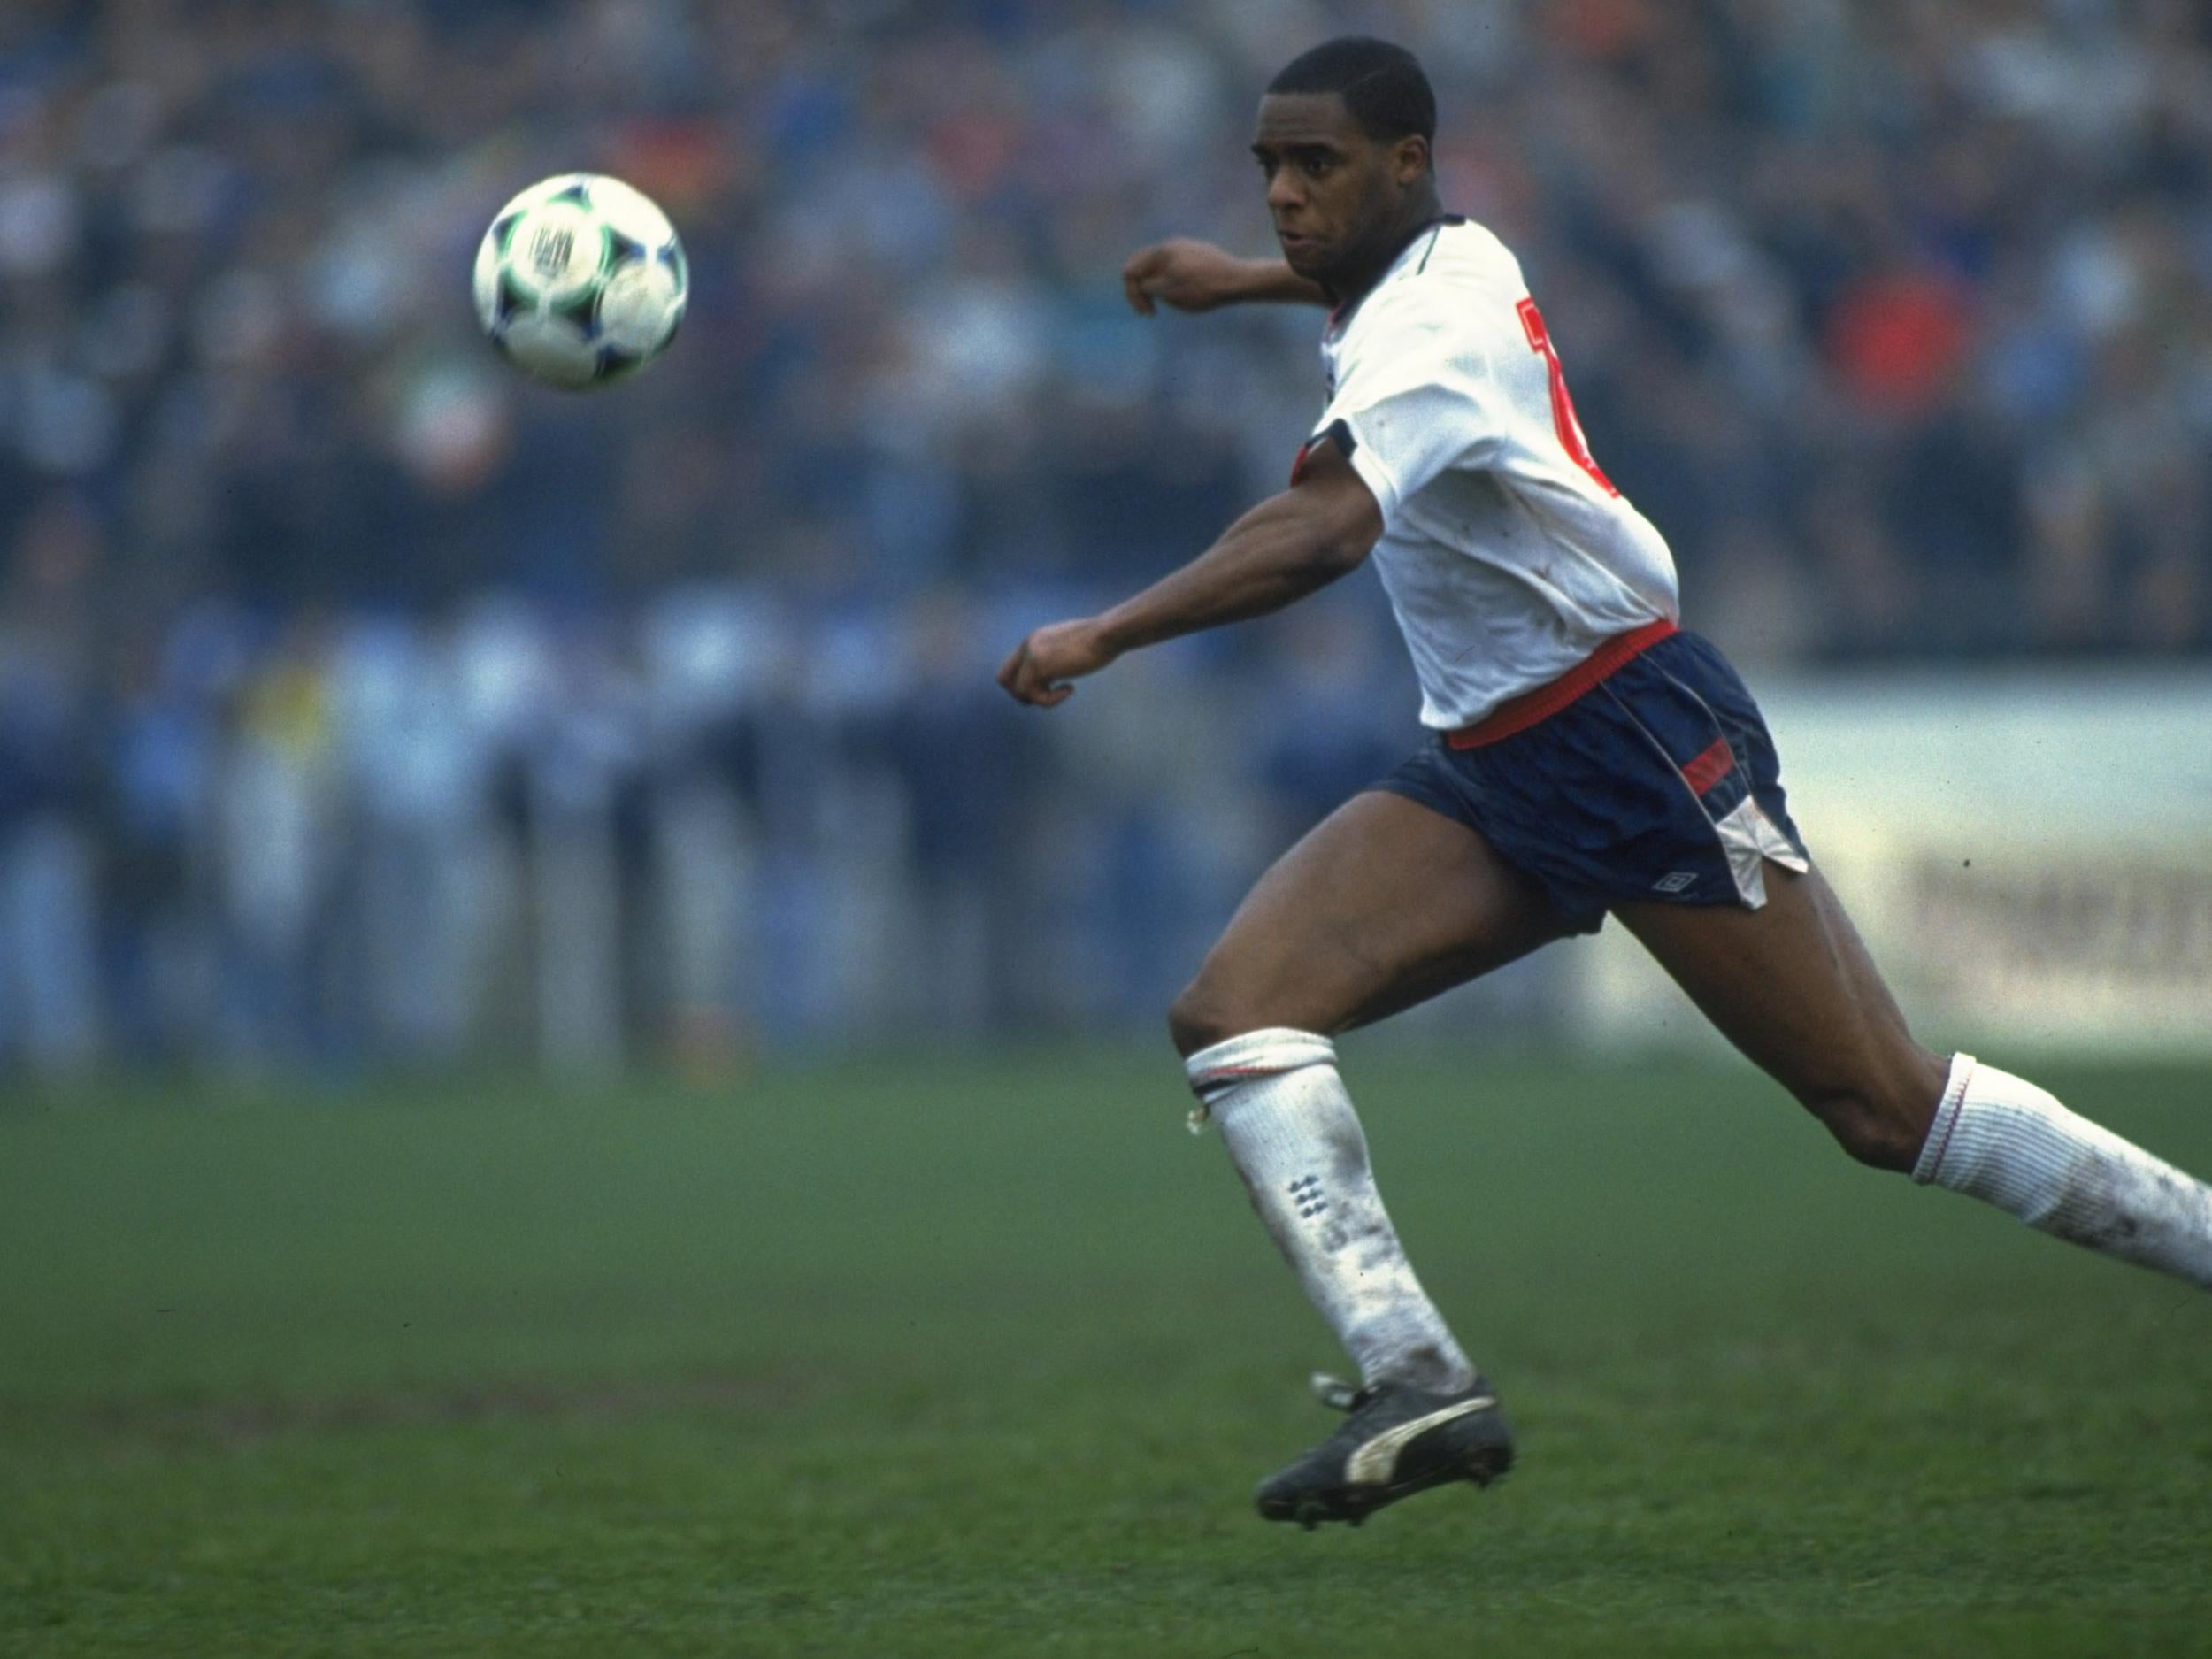 Dalian Atkinson of England 'B' in action during a match against Ireland in Ireland in 1990